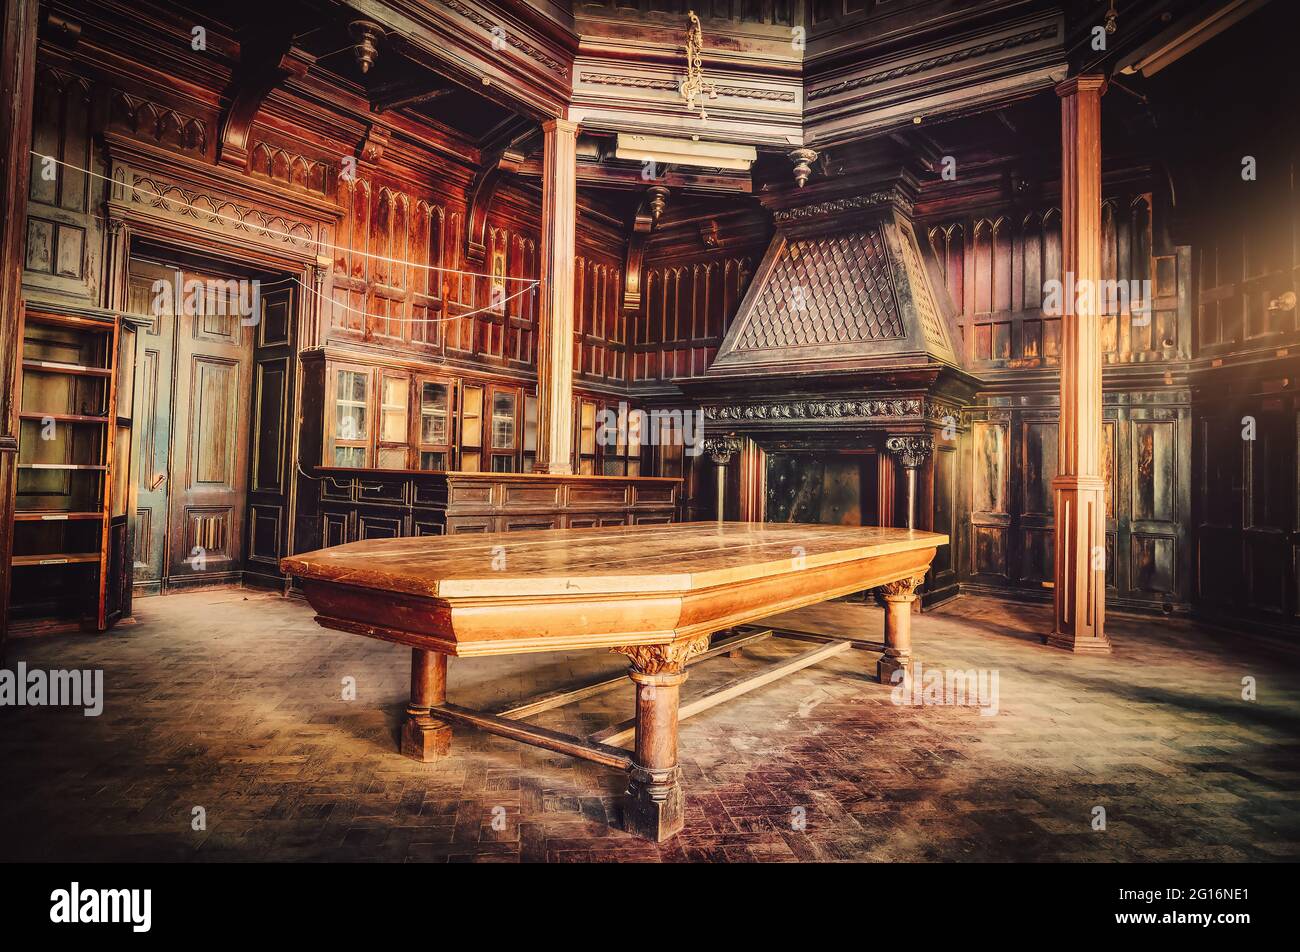 Antique hall with fireplace and table in an ancient building Stock Photo